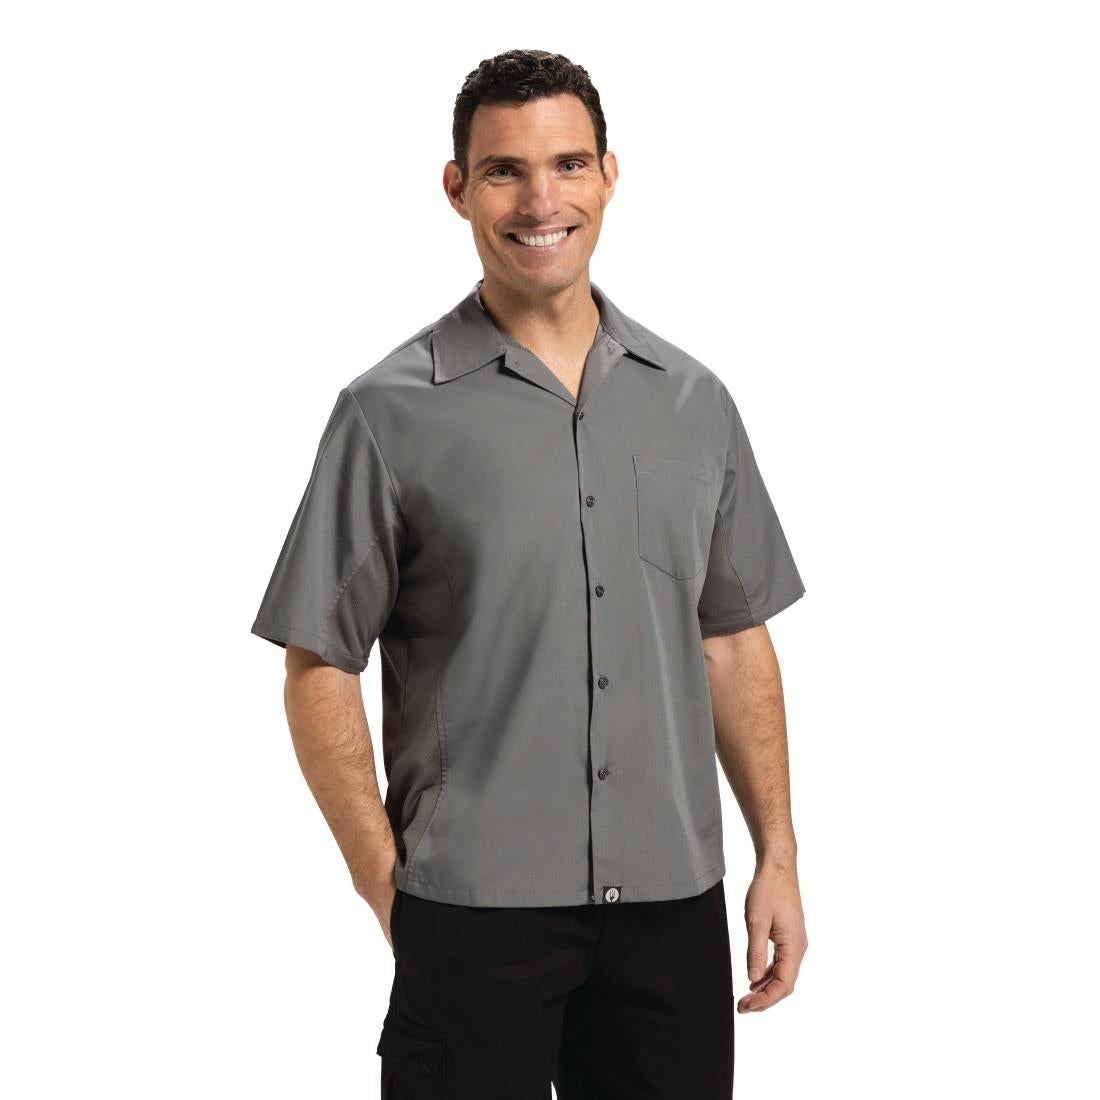 B179-M Chef Works Unisex Cool Vent Chefs Shirt Grey M JD Catering Equipment Solutions Ltd